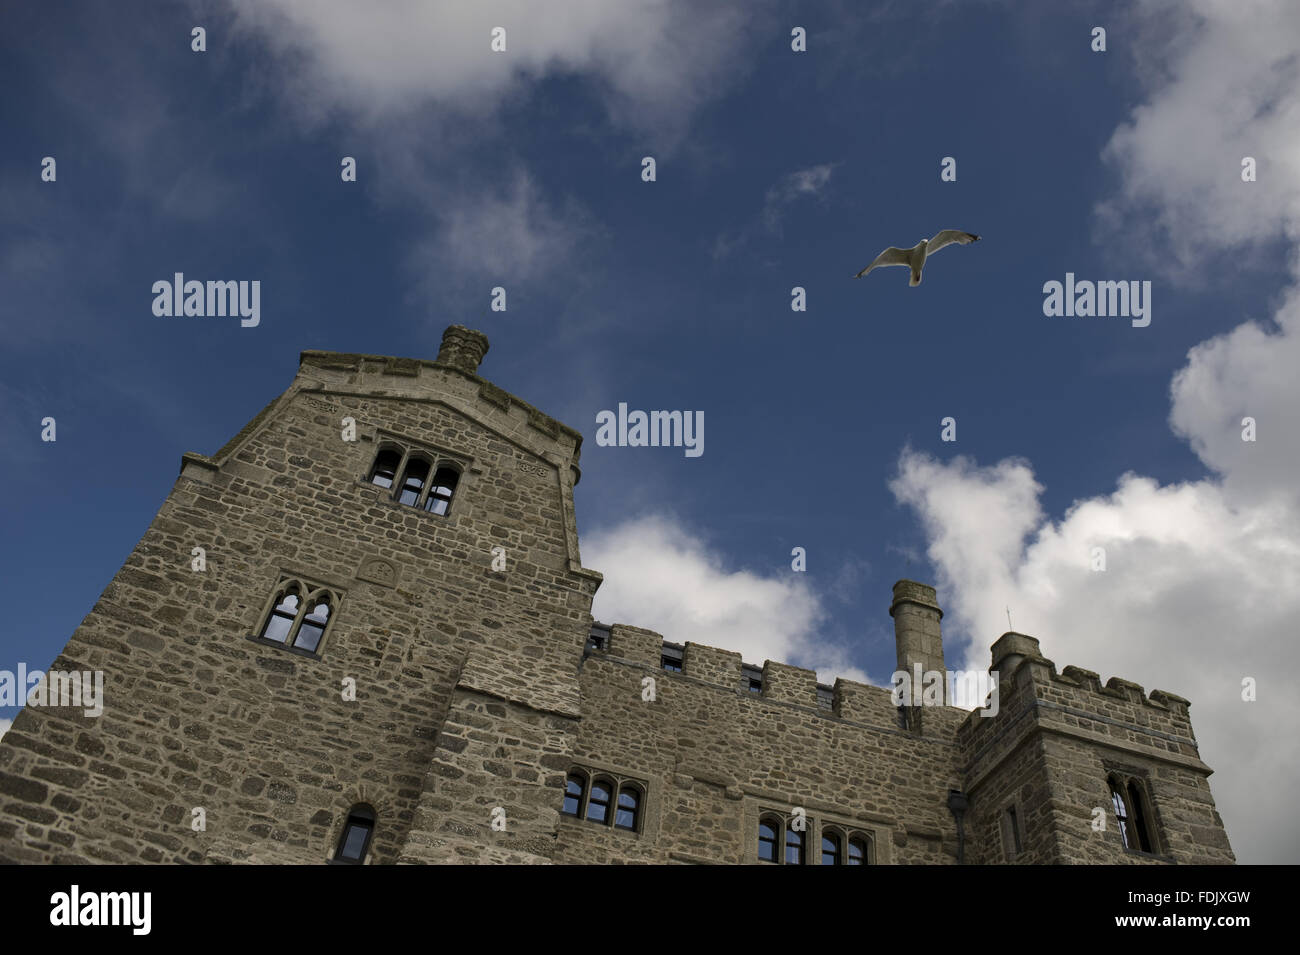 Looking up at the castellated tower of the medieval castle on St Michael's Mount, Cornwall. Stock Photo